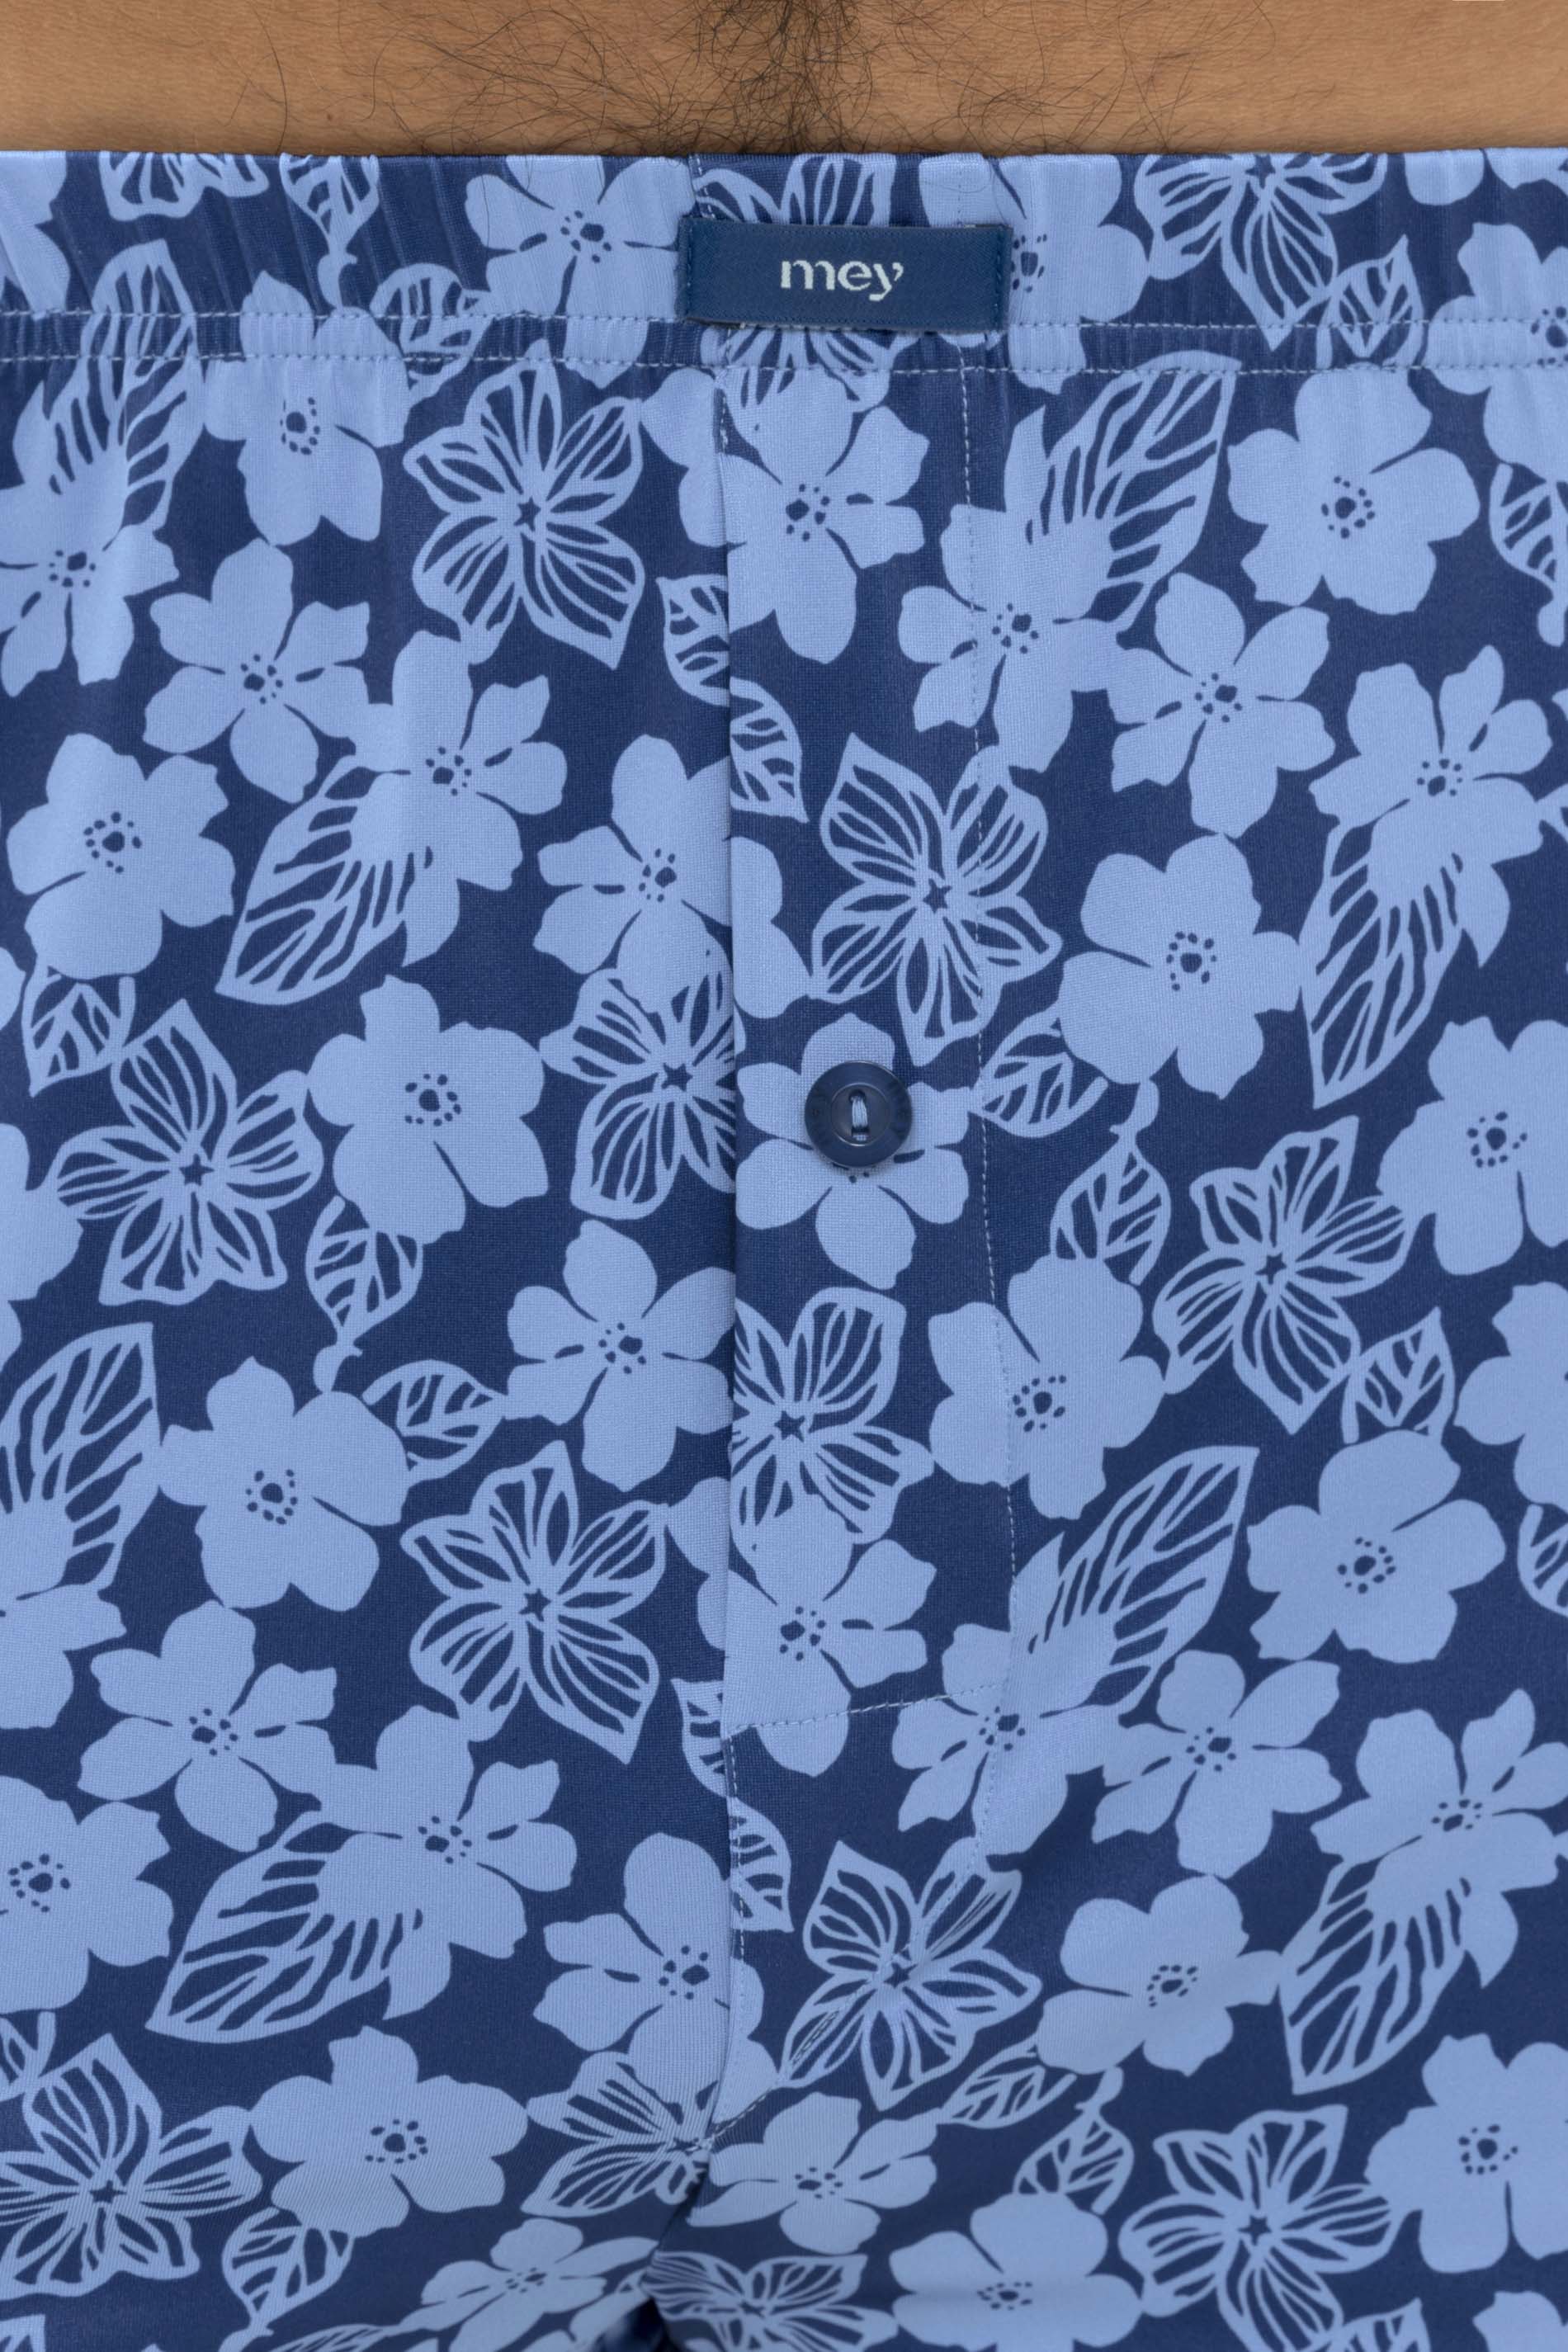 Boxer shorts Serie Flowers Detail View 01 | mey®